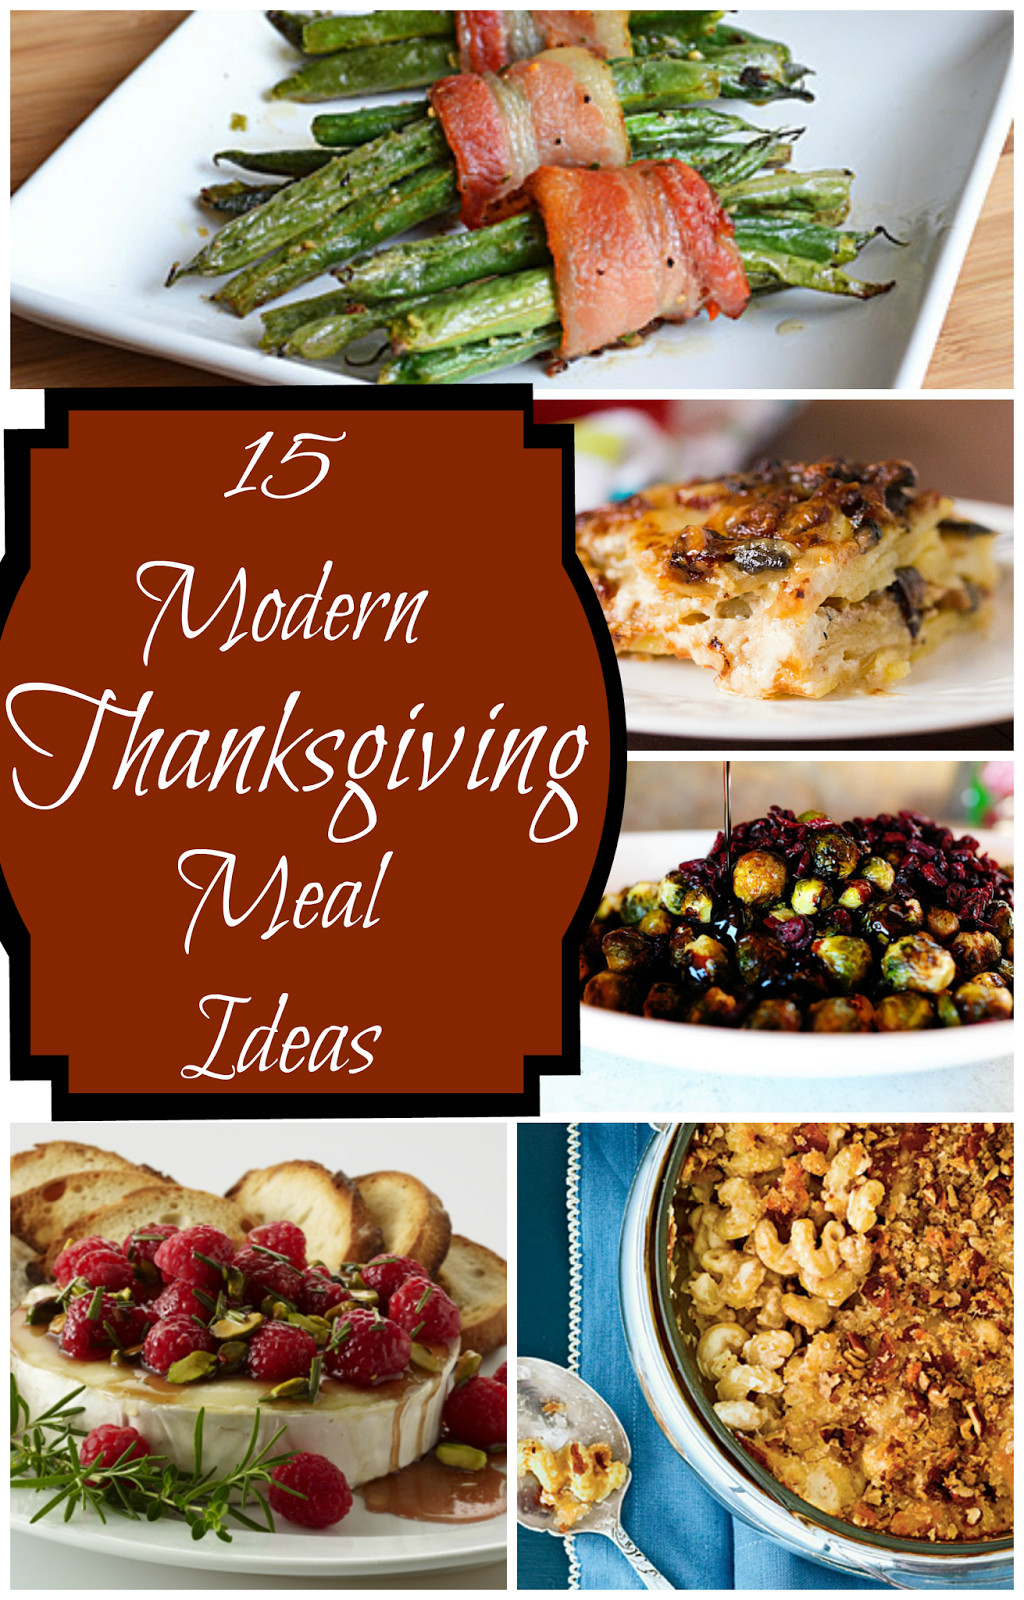 Dinner Ideas For Friends Coming Over
 Not Your Mother s Recipes 15 Modern Thanksgiving Meal